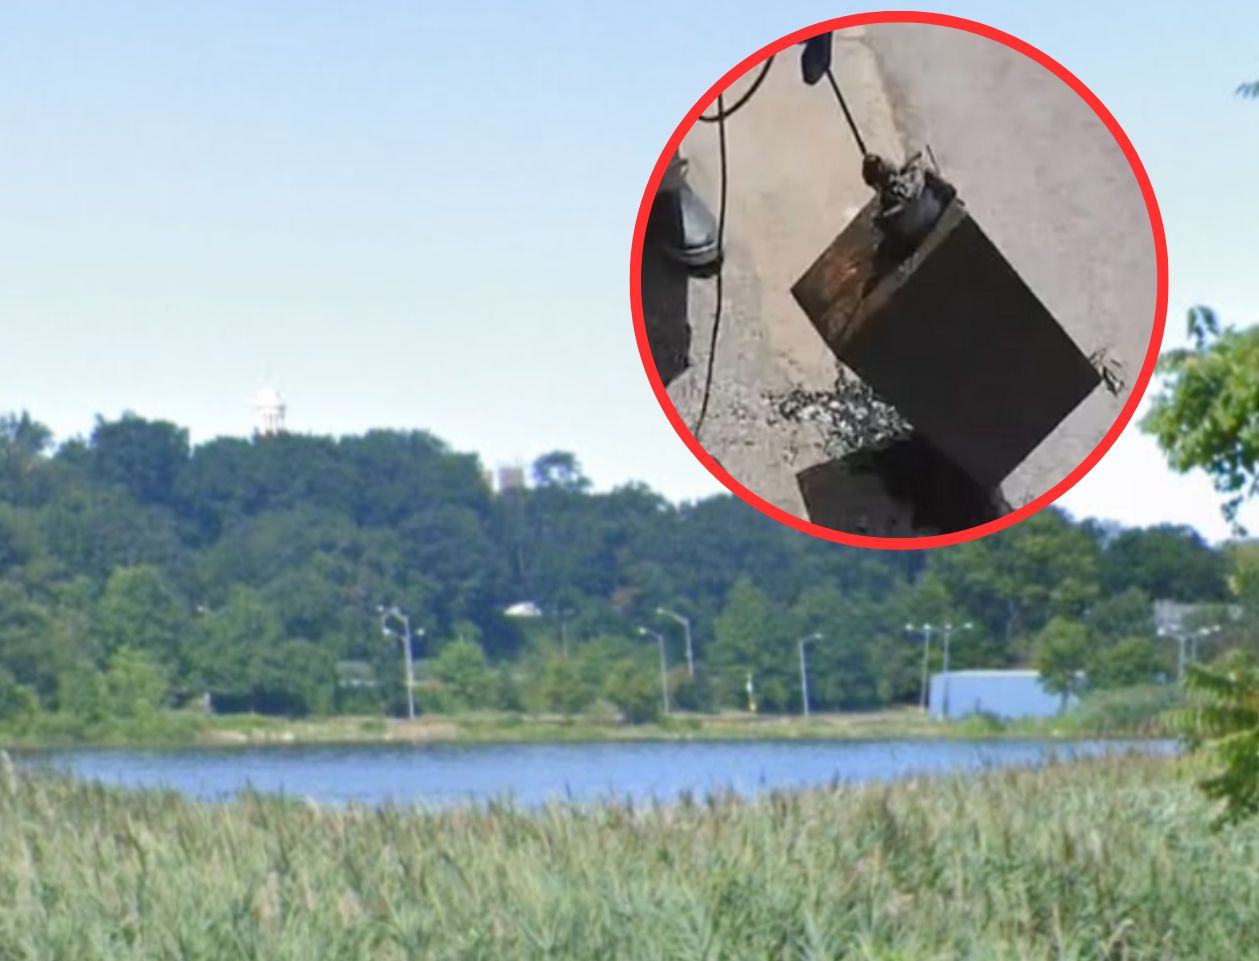 Magnet fishers reel in $100,000 treasure from Flushing Meadows lake